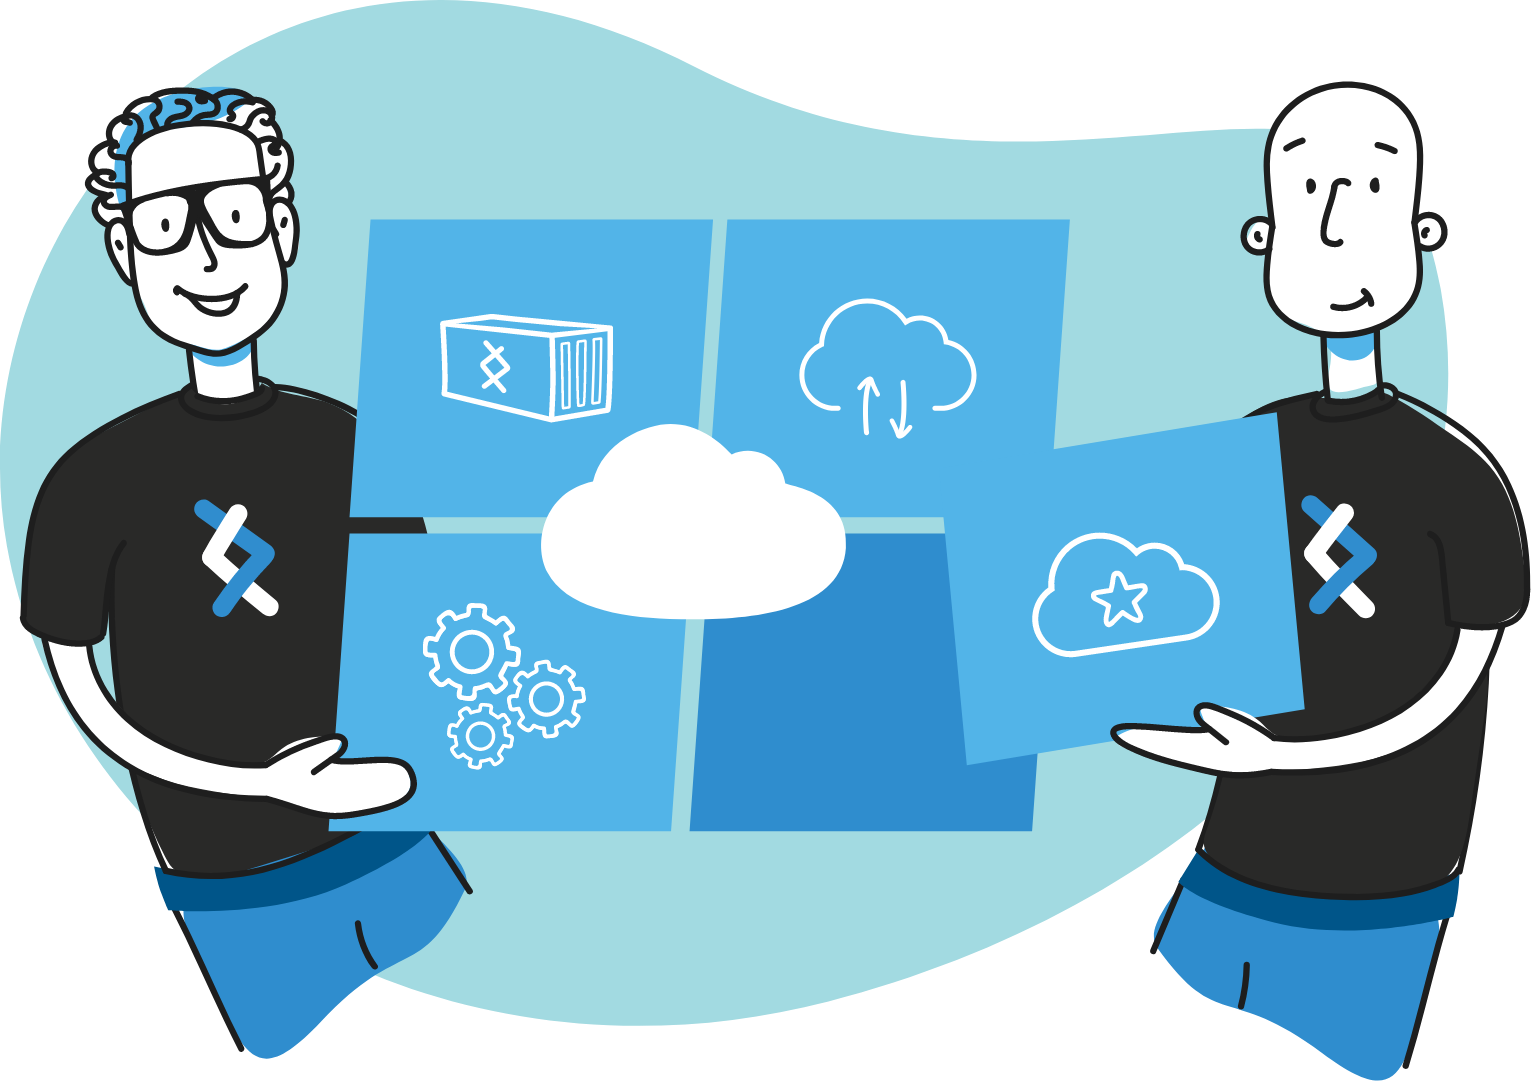 Illustration of DNX characters holding cloud optimisation and storage icons